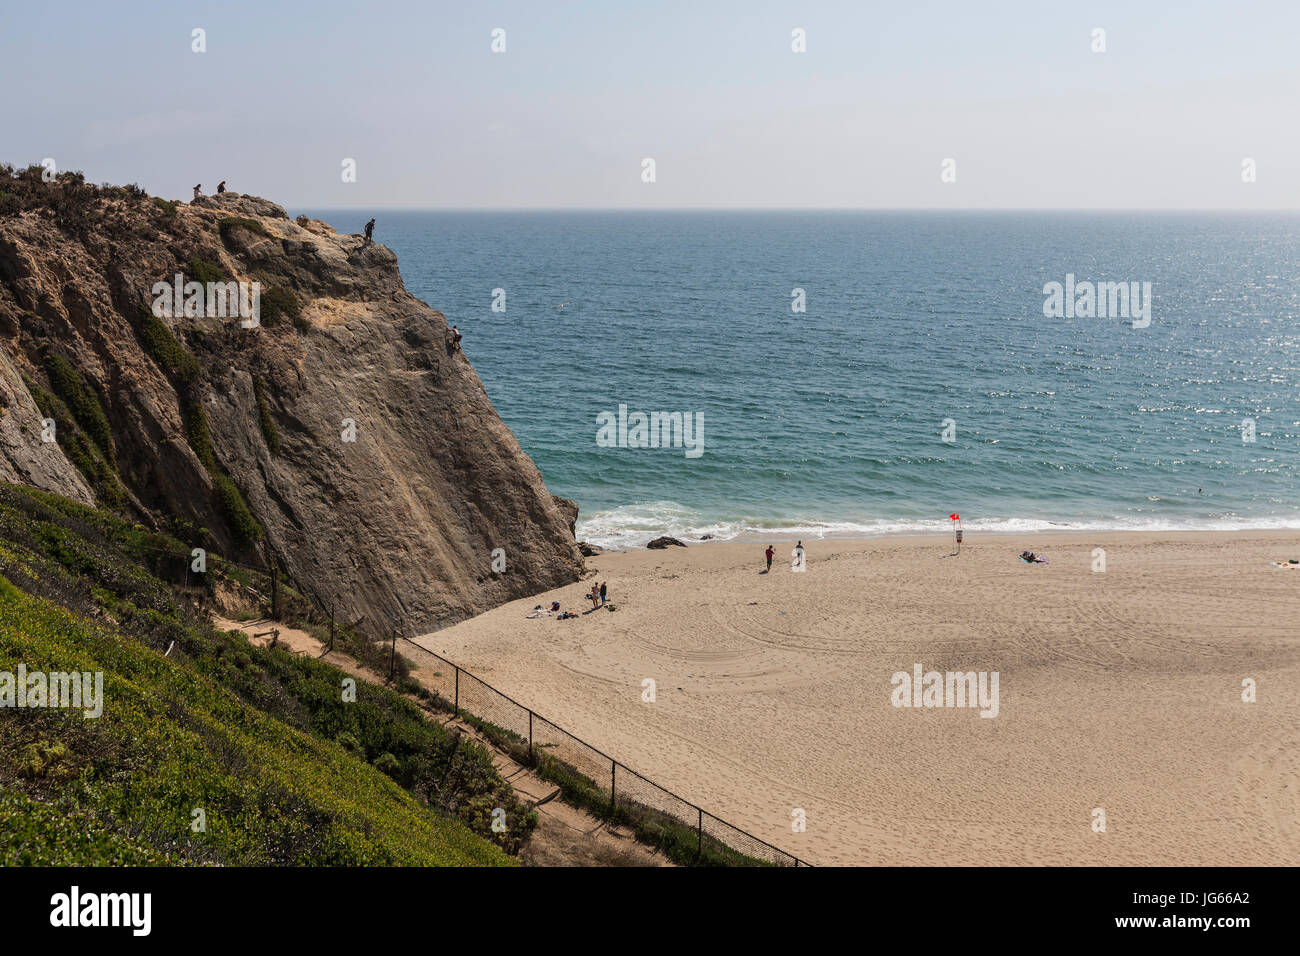 Malibu, California, USA - June 29, 2017:  View of rock climbing cliff at Westward Beach in Point Dume State Park. Stock Photo